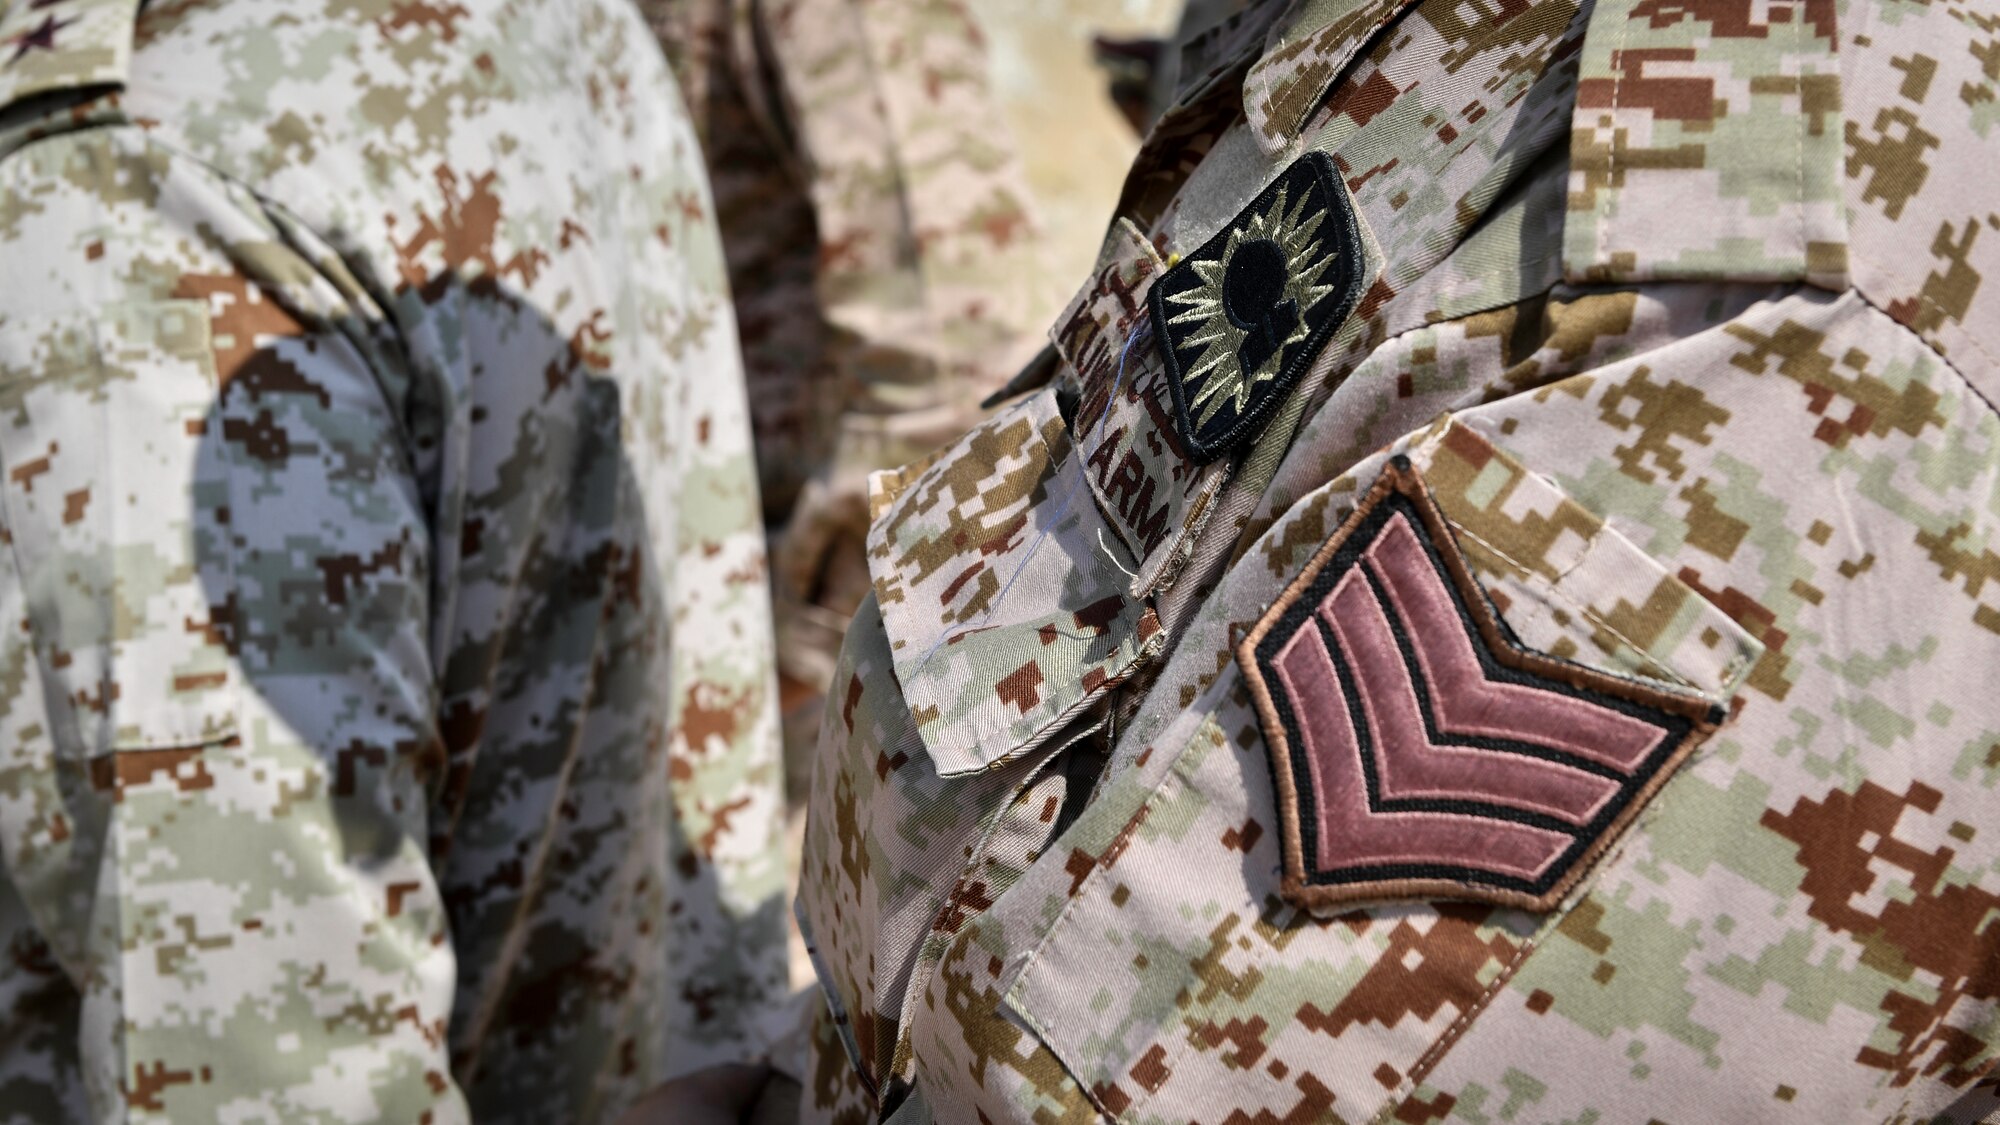 An explosive ordnance disposal badge is worn by a Kuwaiti Ministry of Defense EOD technician during an insensitive munitions training at the Udari Range, Kuwait, Sept. 26, 2019. The EOD badge is a military badge that recognizes service members as qualified EOD technicians who are specially trained to deal with the construction, deployment, disarmament and disposal of high explosive munitions. EOD technicians worldwide use the same basic badge design with minute design differences.